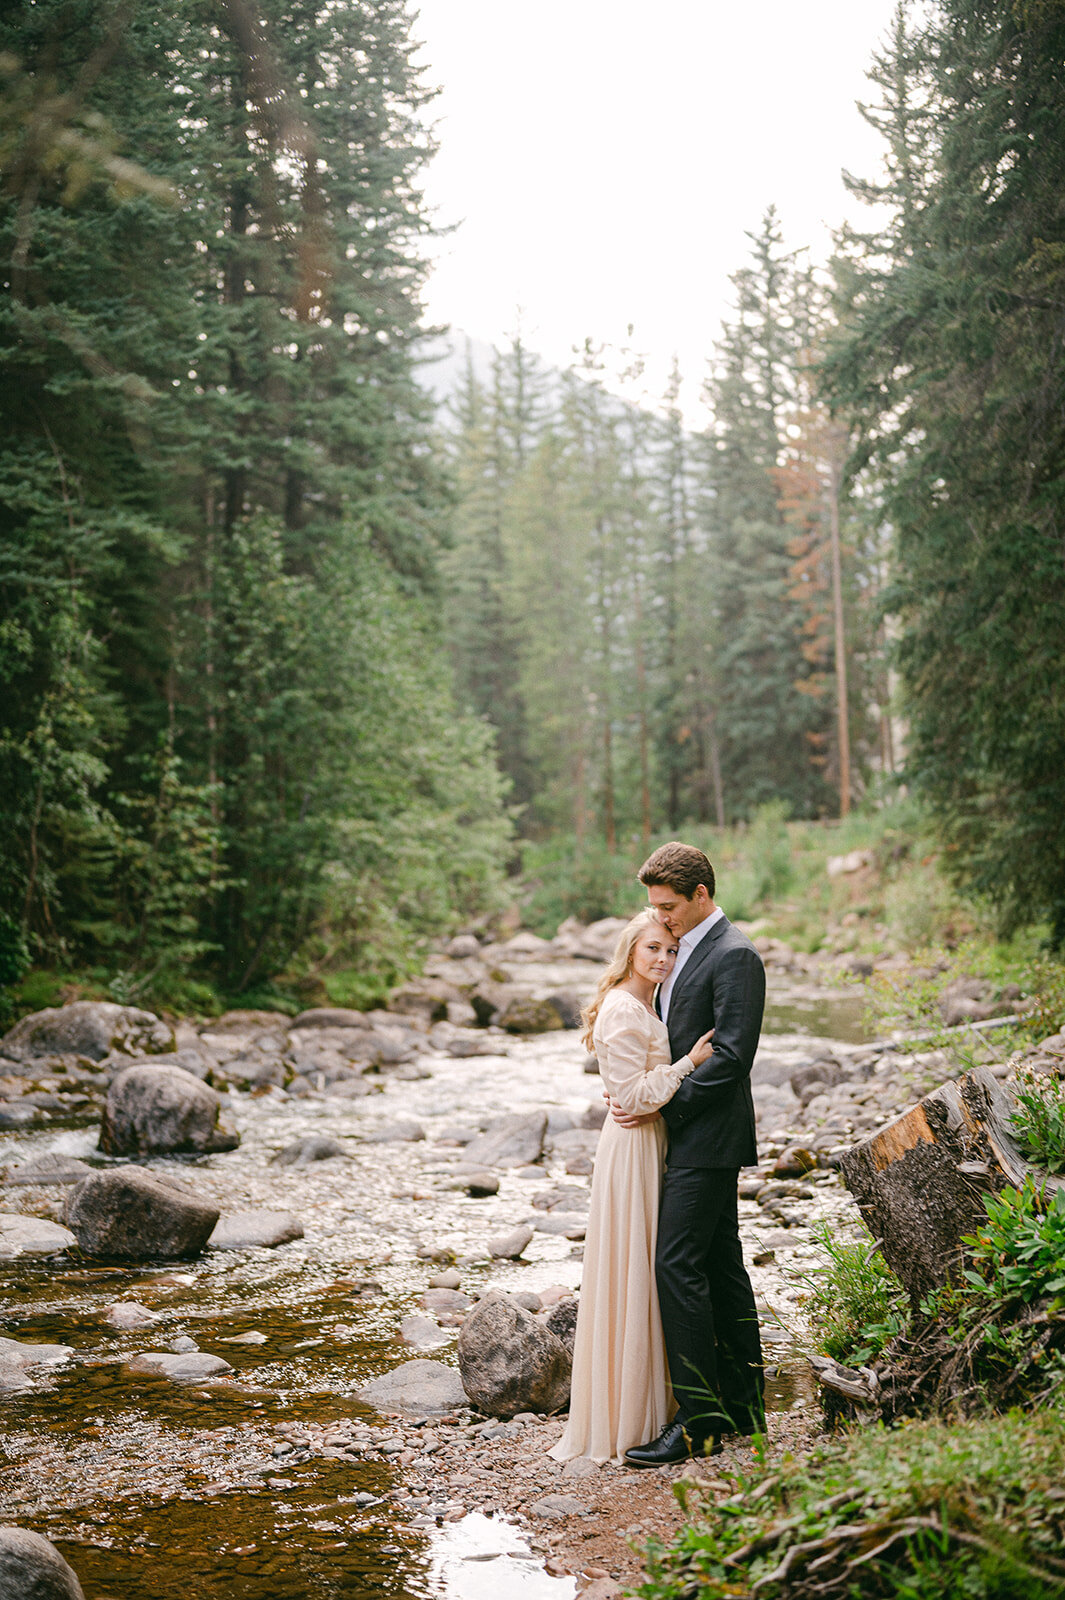 whimsical-vail-village-summer-engagement-by-jacie-marguerite-9